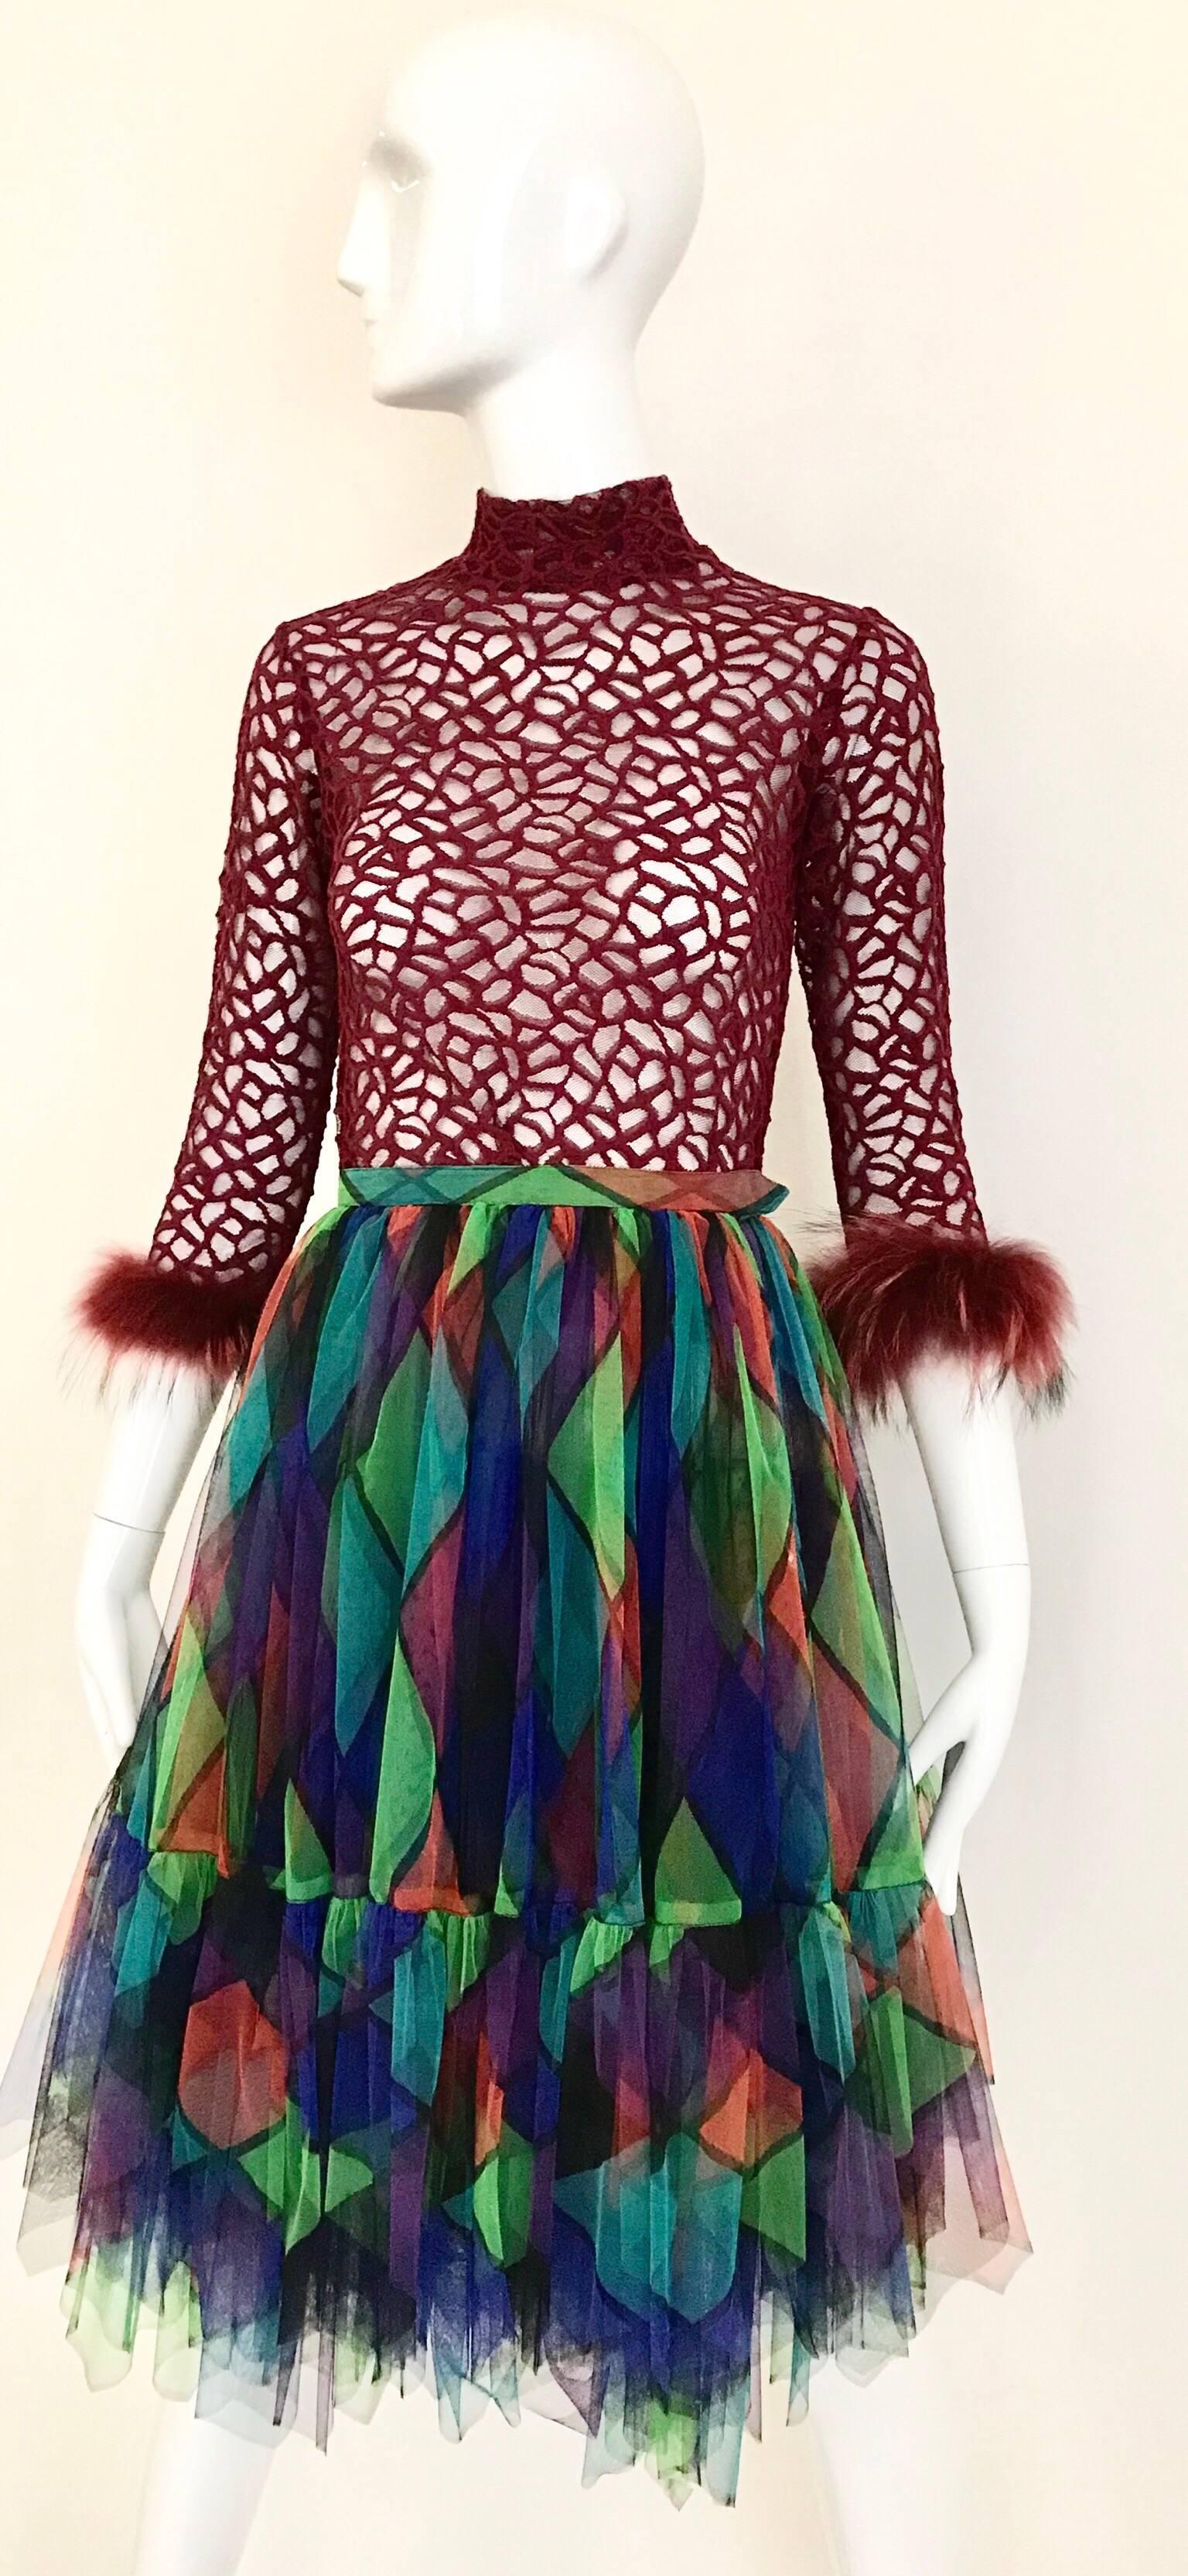 90s Jean Paul Gaultier Maroon mesh viscose top with ostrich sleeves.
Top is styled with Vintage Saint Laurent Harlequin Tulle skirt ( available for purchase at my 1stdibs shop) 
Top is XS. fit size 0/2 small/petite
